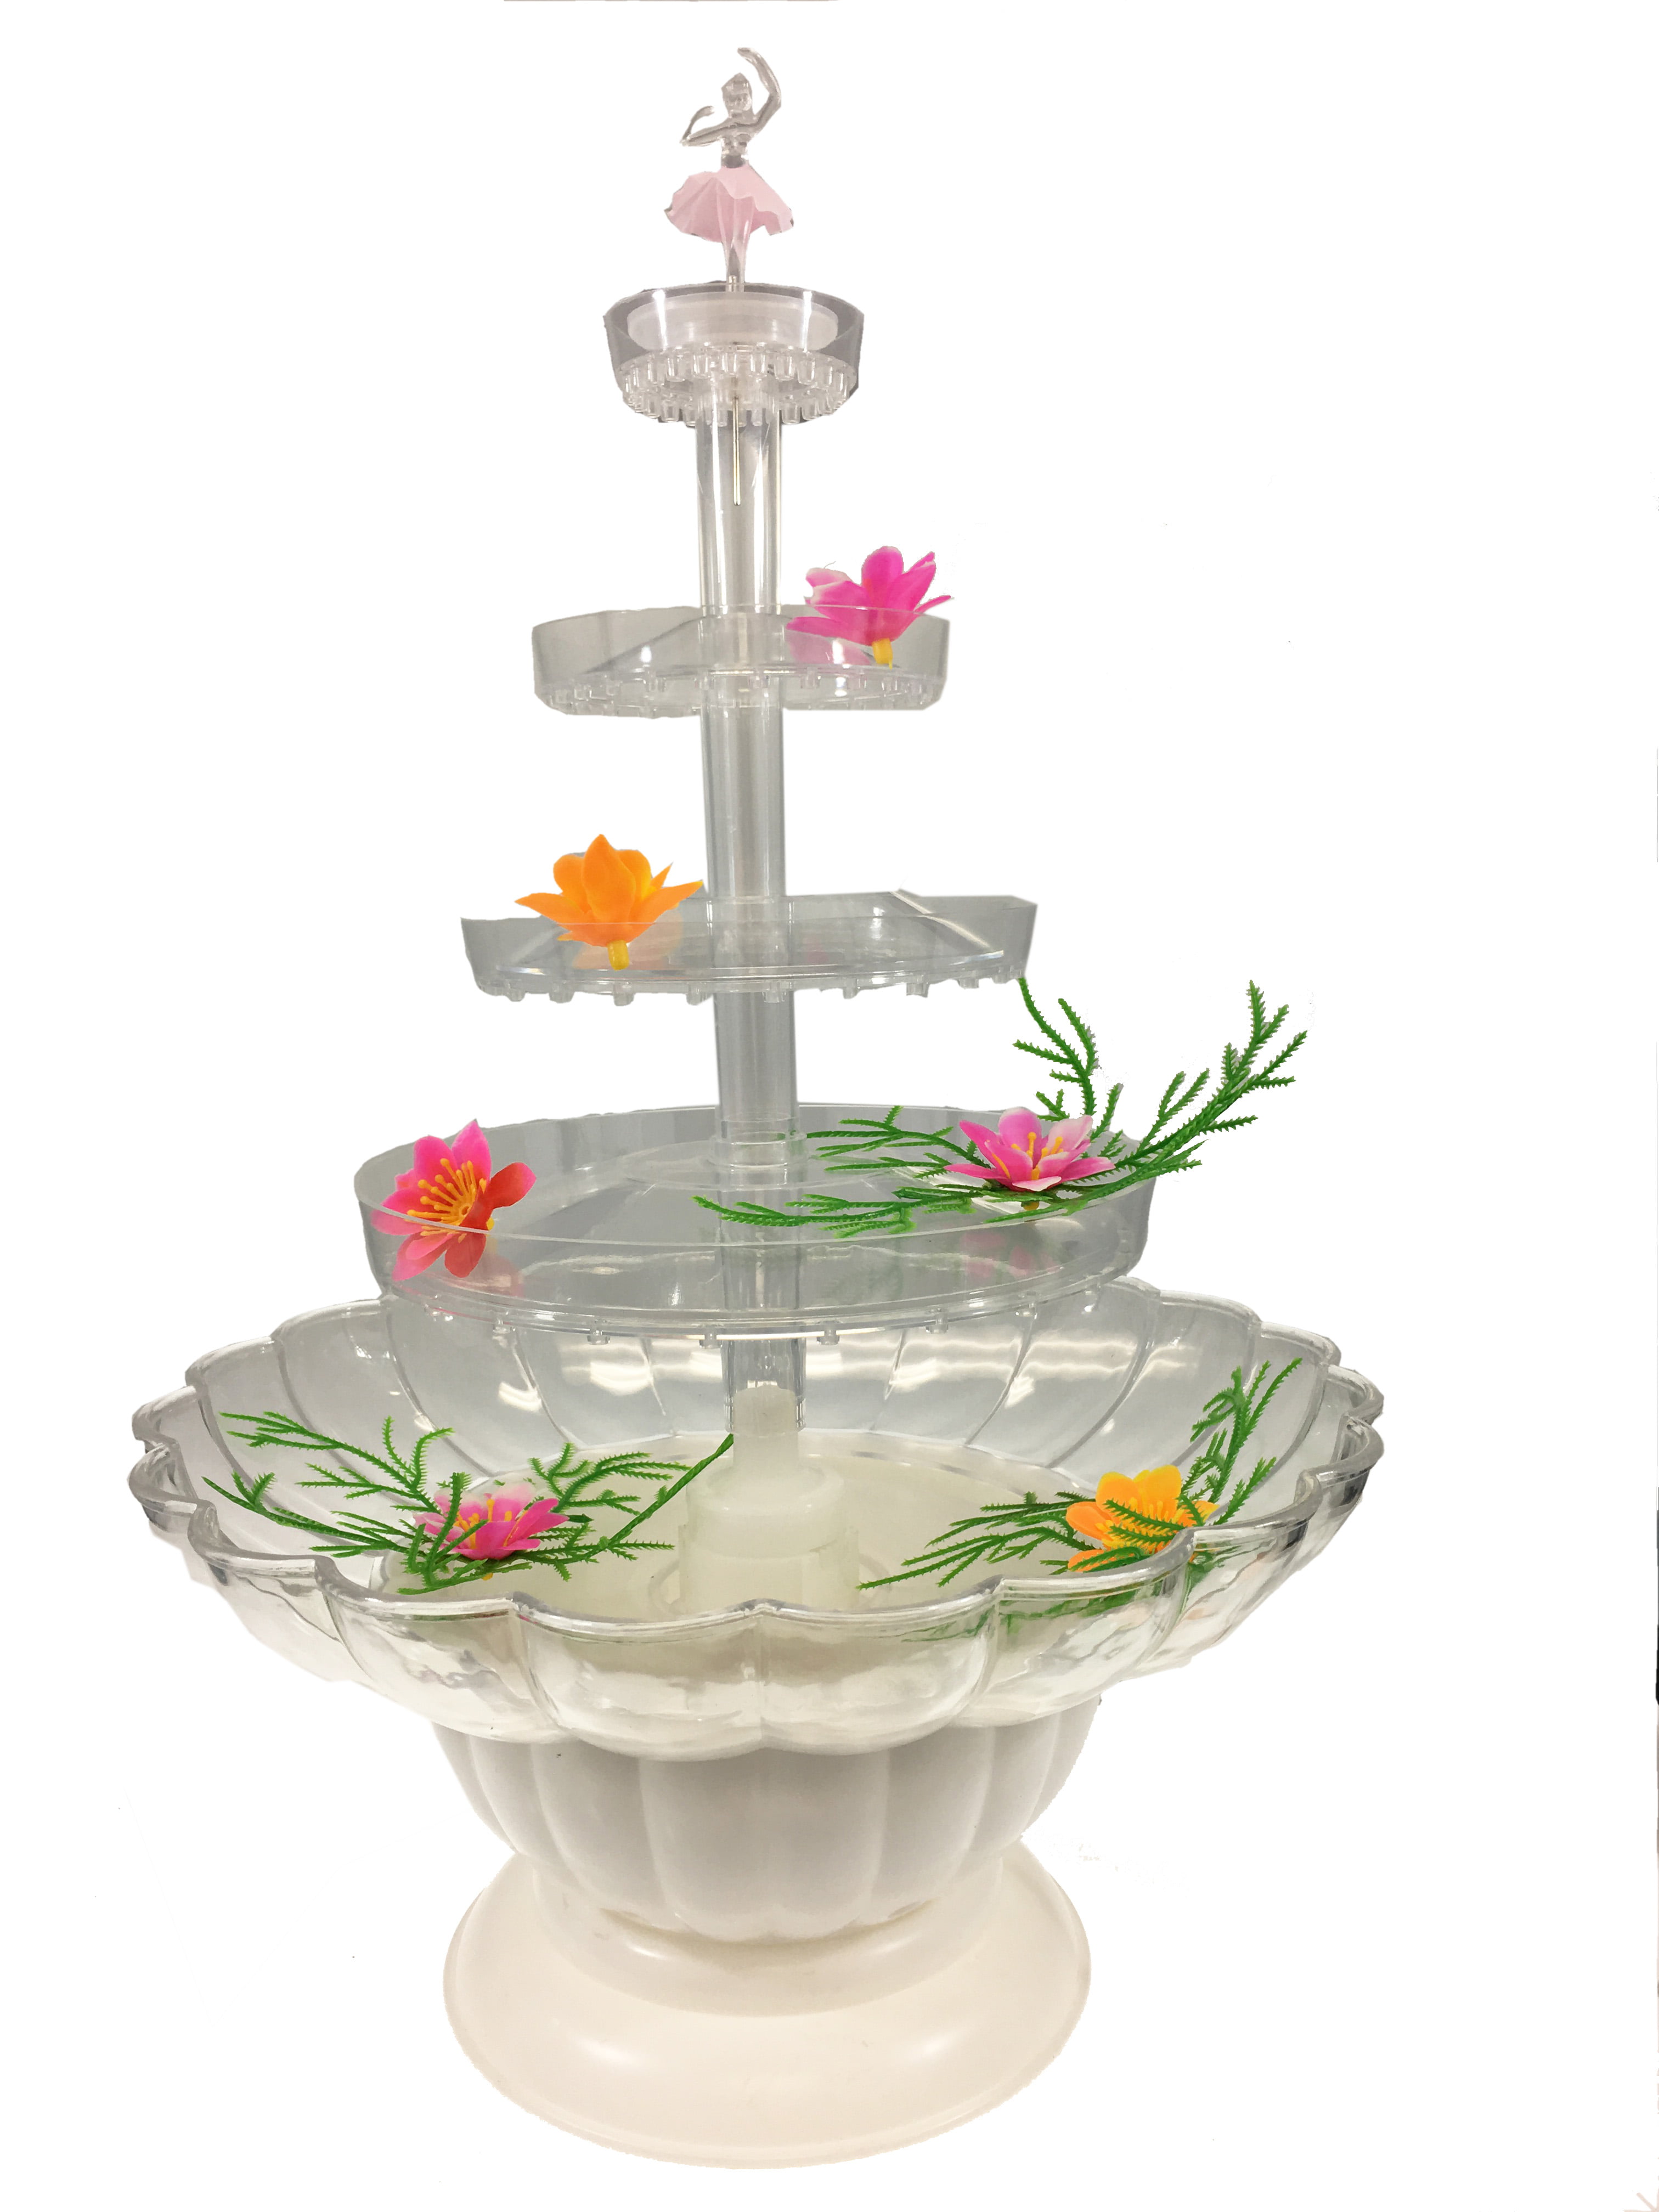 Lighted Plastic Water Fountain For Weddings Office Garden or Cake Centerpiece Home LA Crafts 13 inch